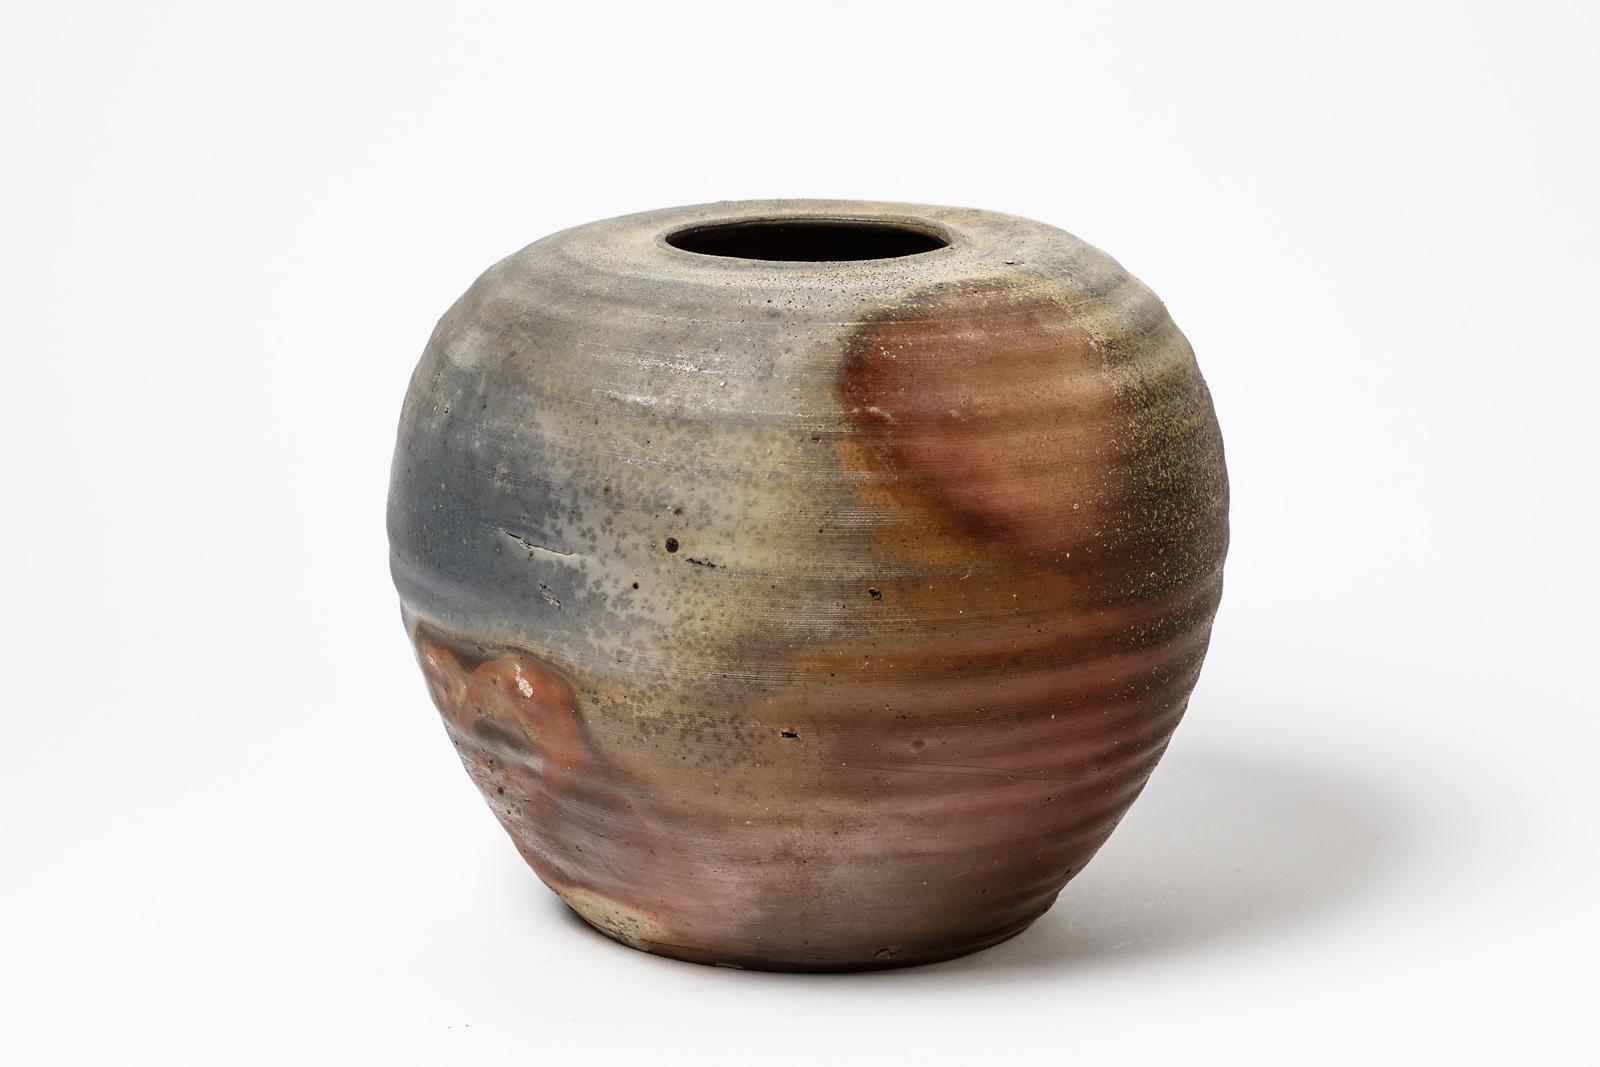 French Hervé Rousseau Boisbelle 20th Century Grey and Brown Stoneware Ceramic Vase 1980 For Sale